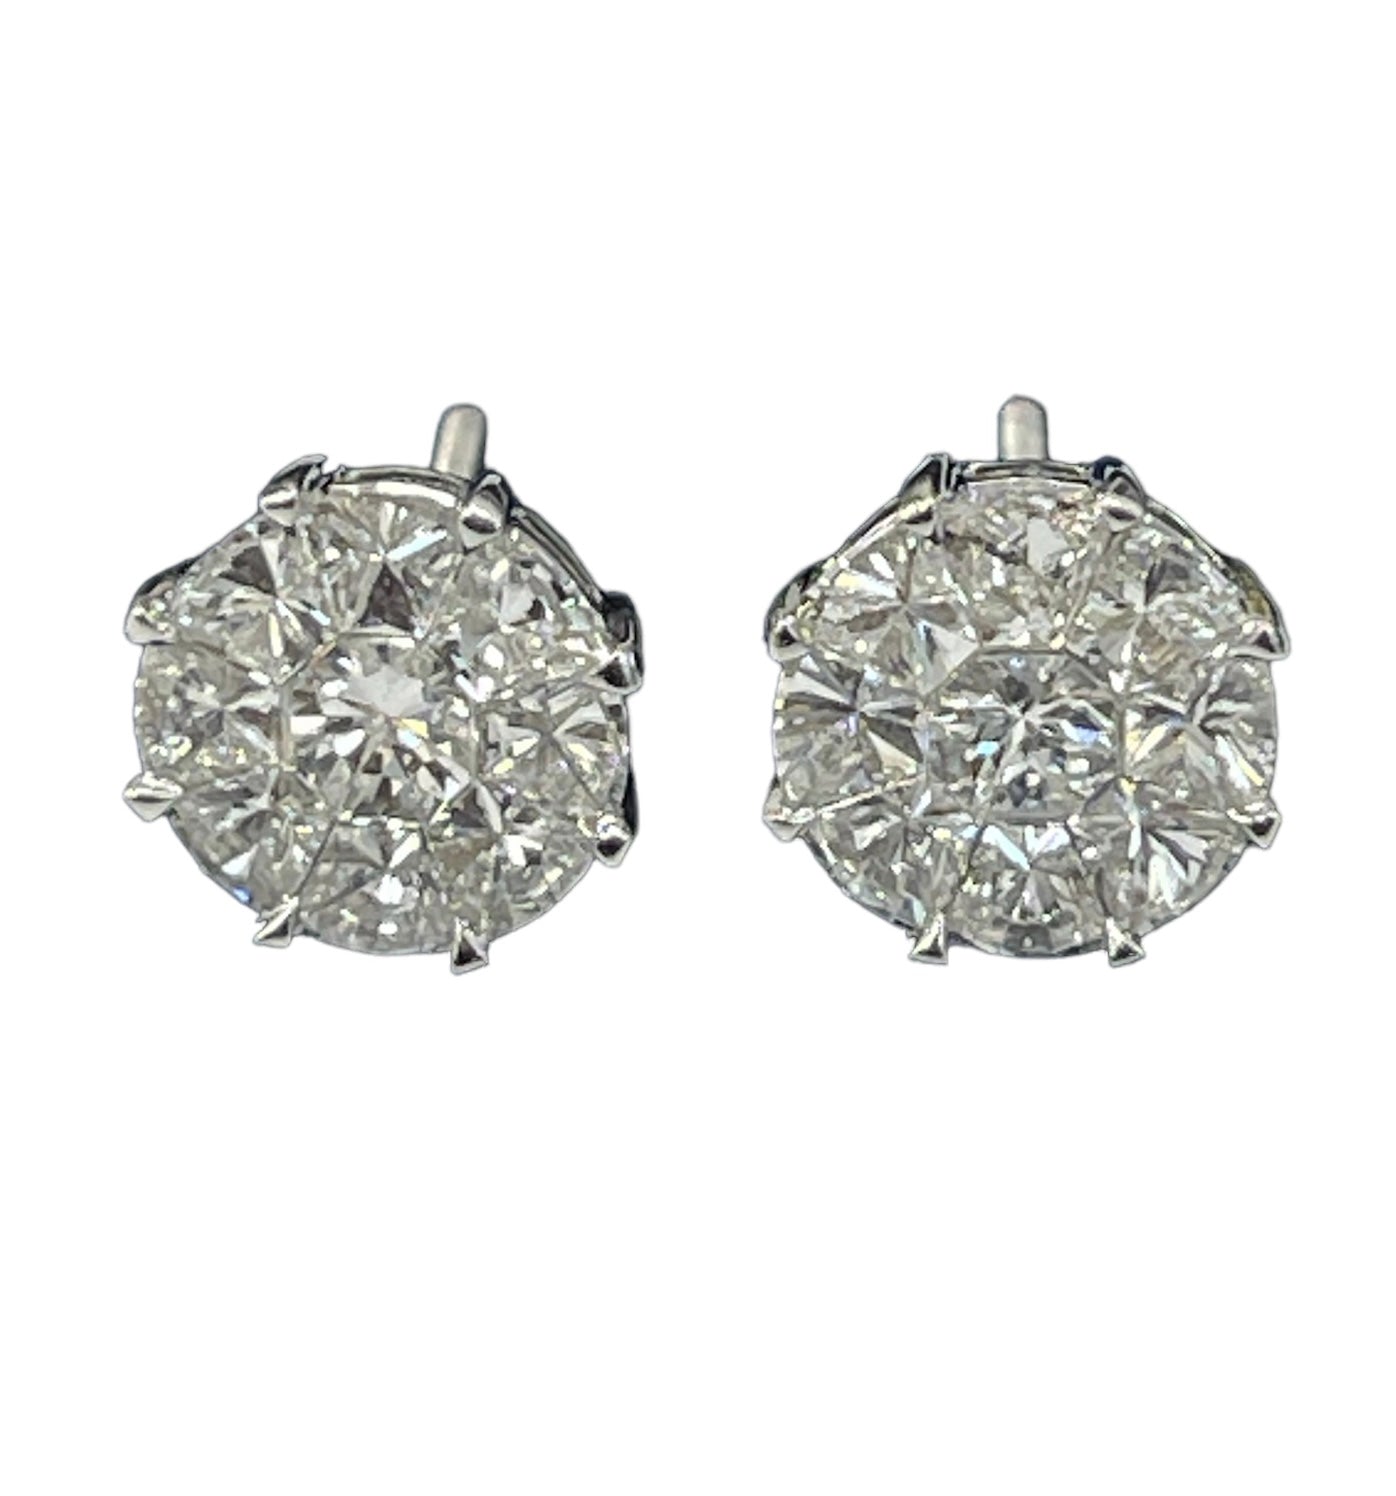 Special Mixed Cut Natural Diamond Illusion Octagon Earrings White Gold 18kt